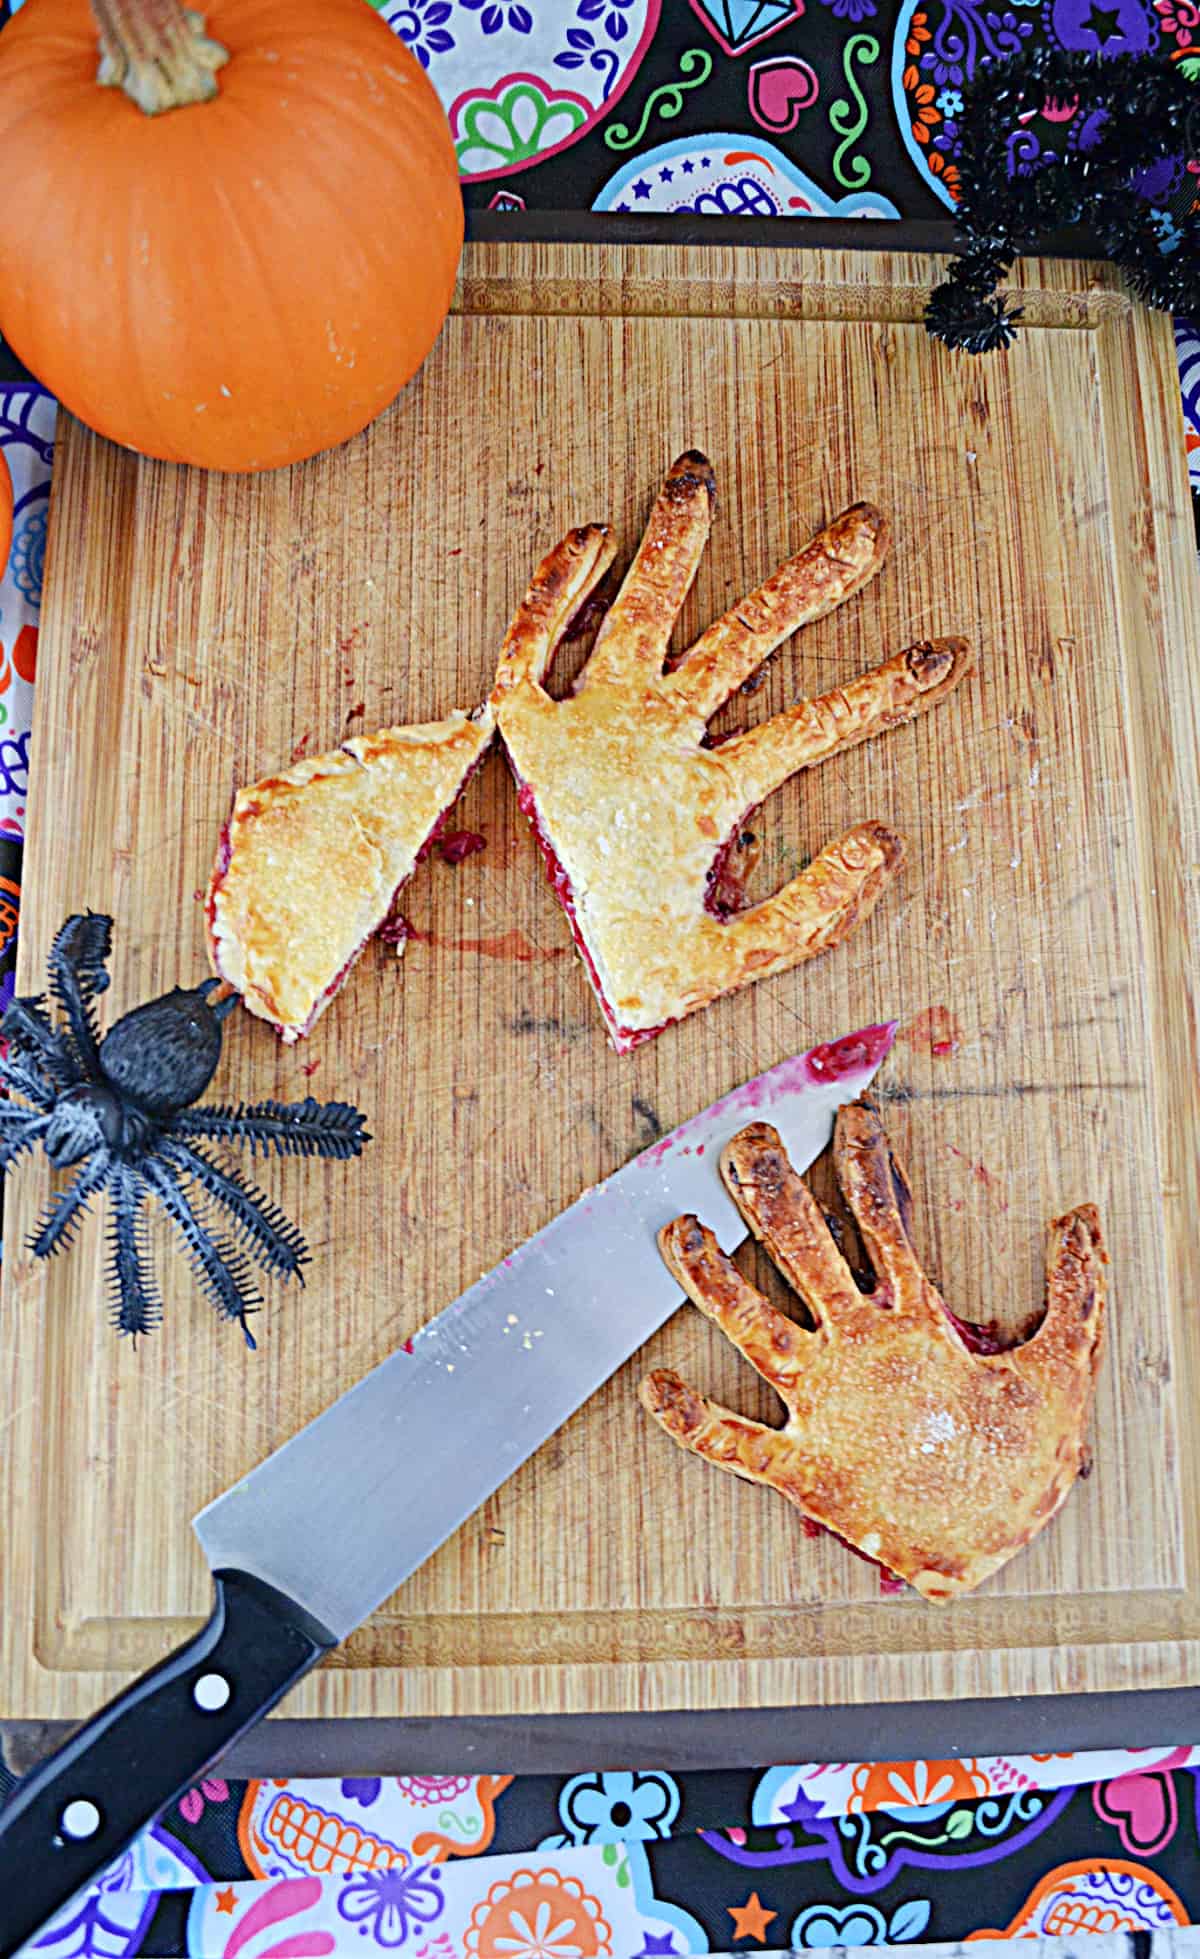 Two severed hand pies with a spider crawling towards them, a knife on the board, and a pumpkin behind it.